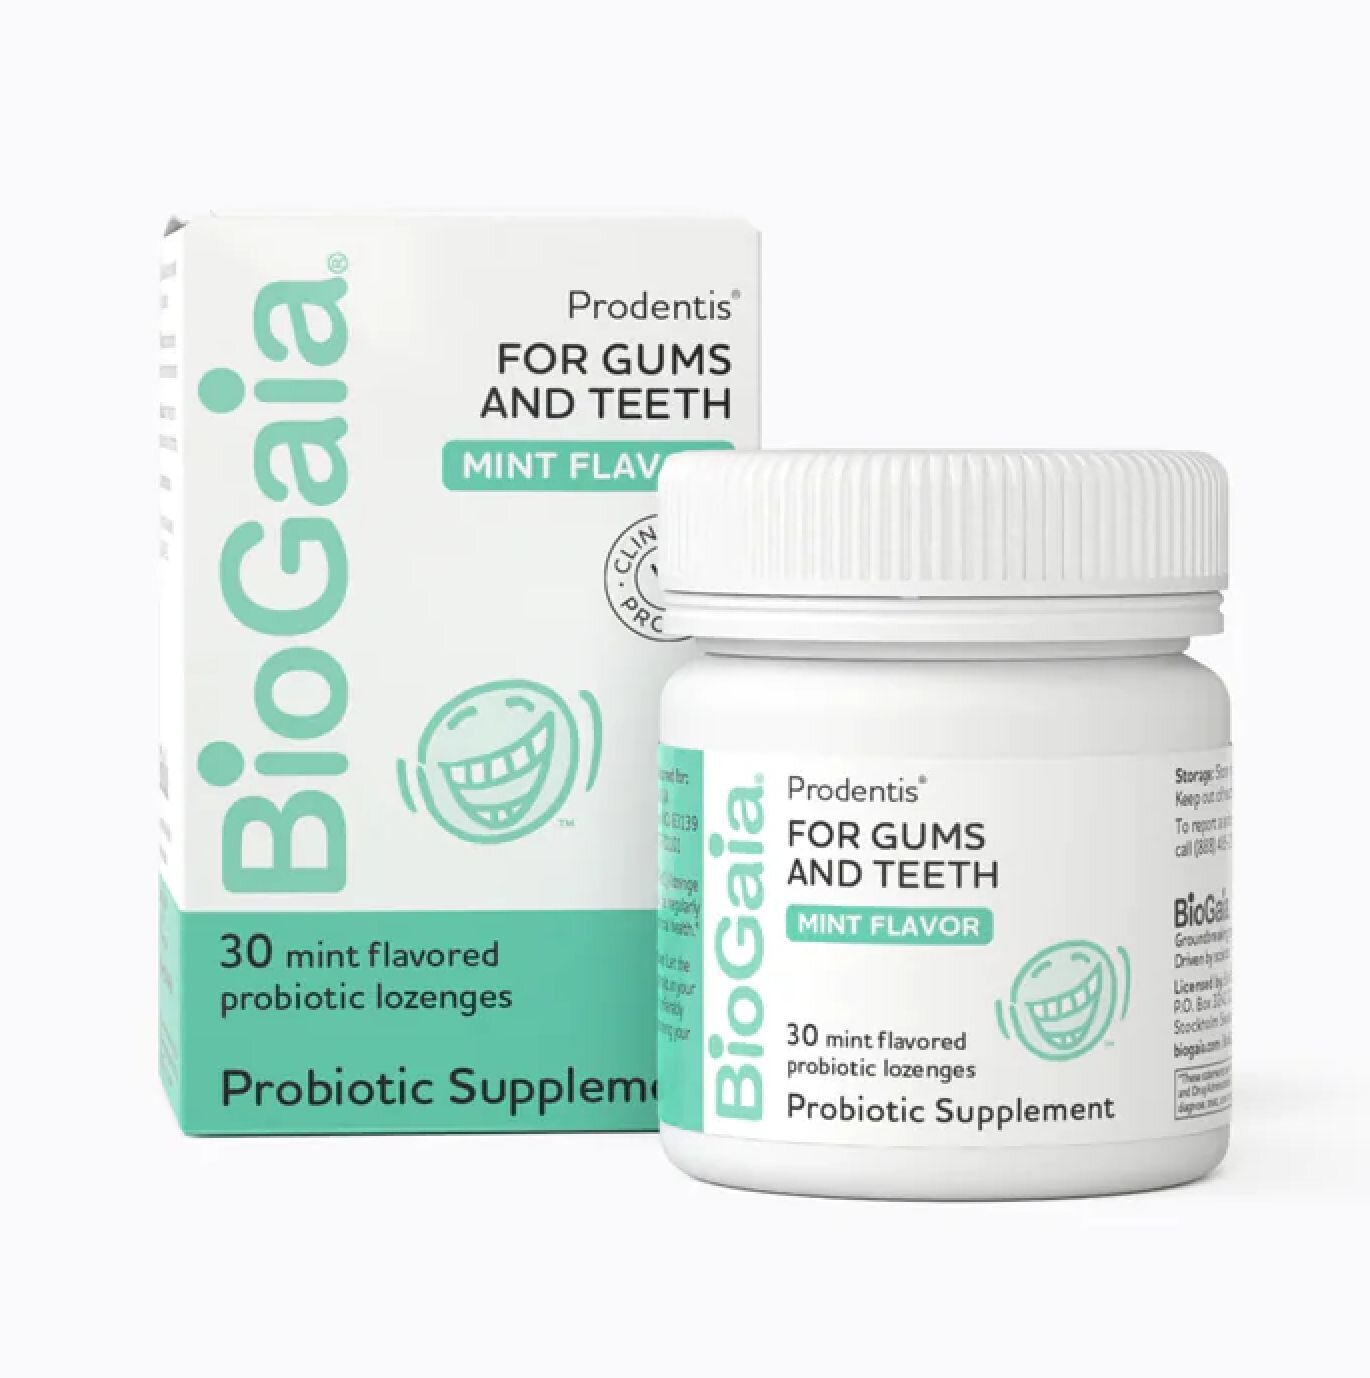 Something to share! 

We have been talking about supporting your oral and gut microbiome. Here's something to consider. 

BioGaia Prodentis lozenges are a daily probiotic supplement for healthy gums and fresh breath. Proper oral hygiene goes beyond b